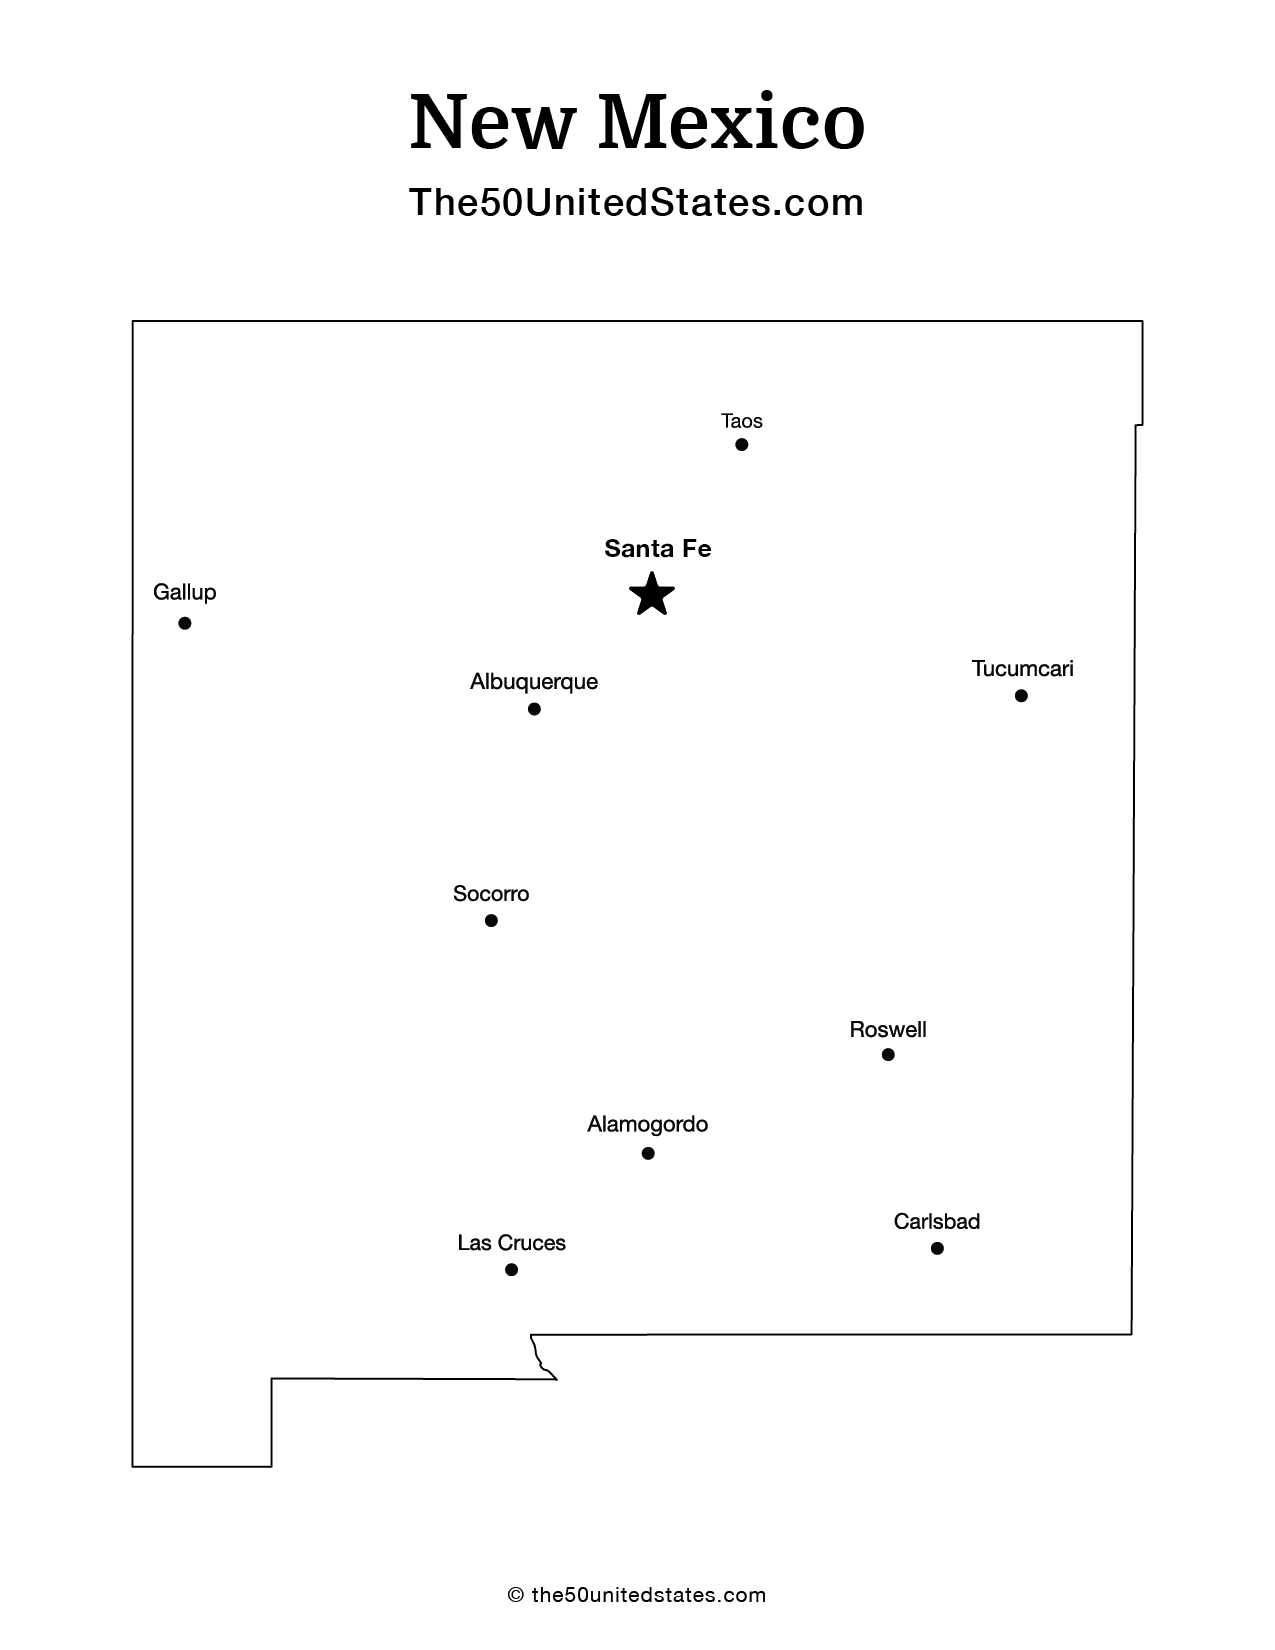 Map of New Mexico with Cities (Labeled)